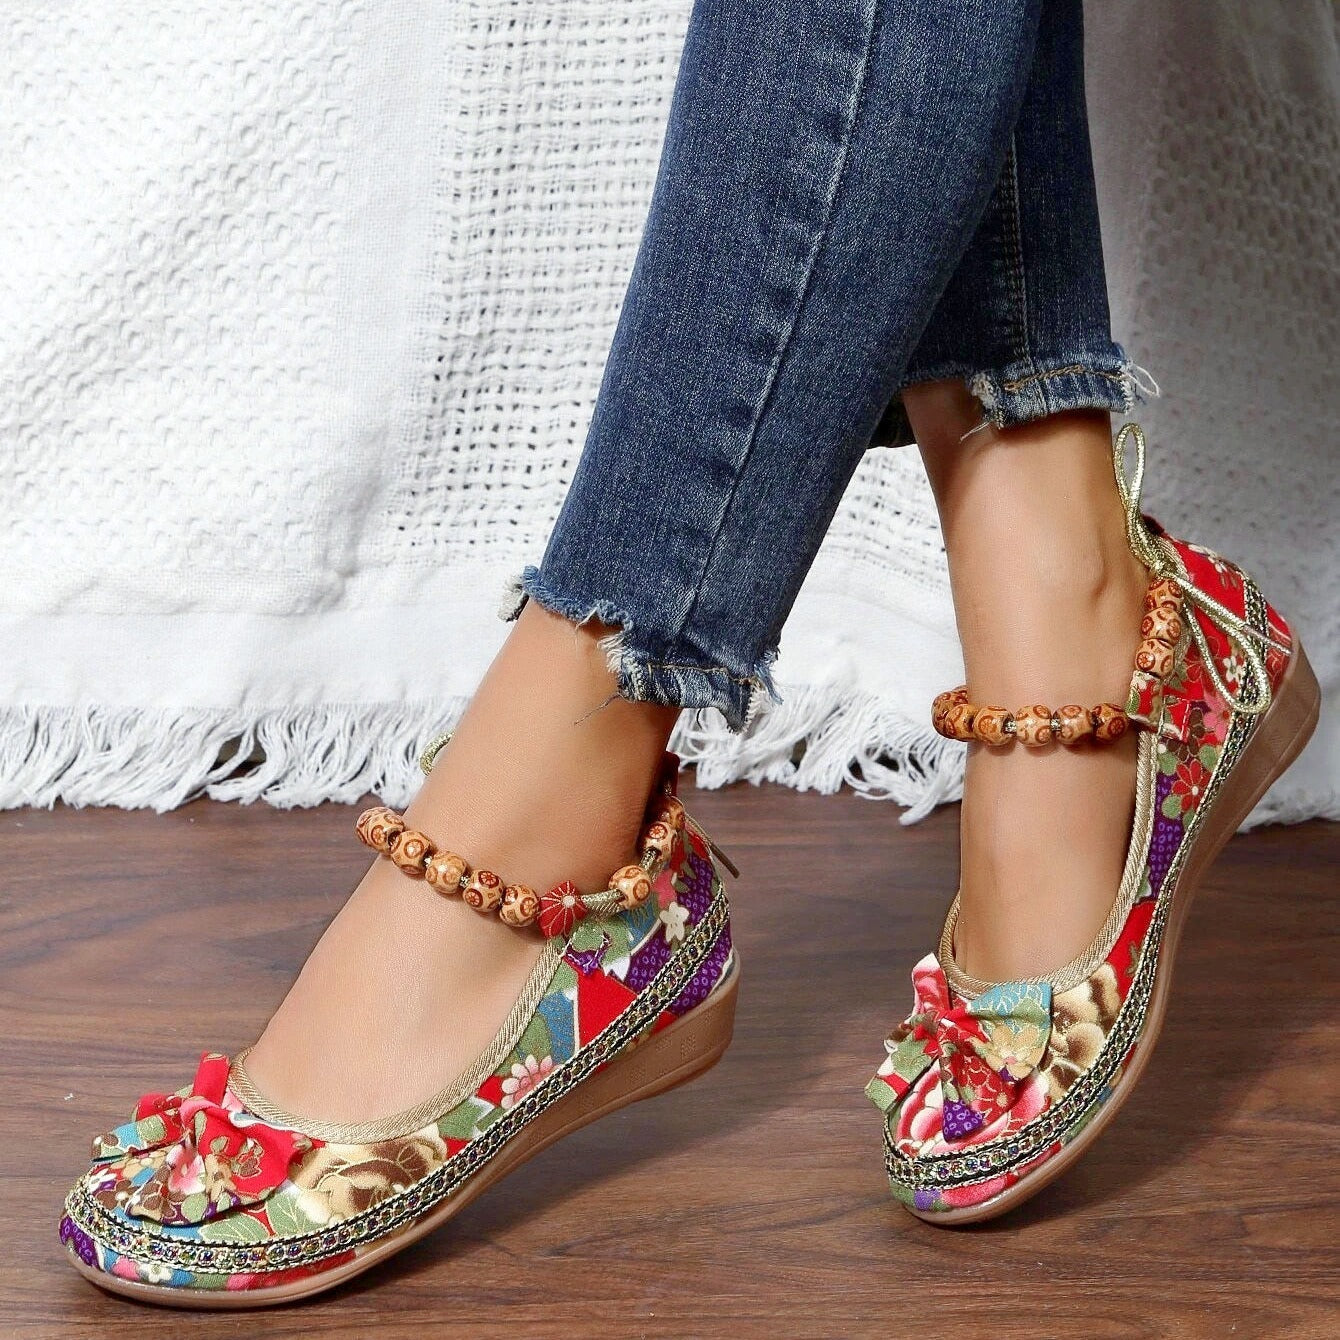 「lovevop」Women's Stylish Floral Print Slip-Ons - Ethnic Ankle Strap Flat Shoes for Casual Walks